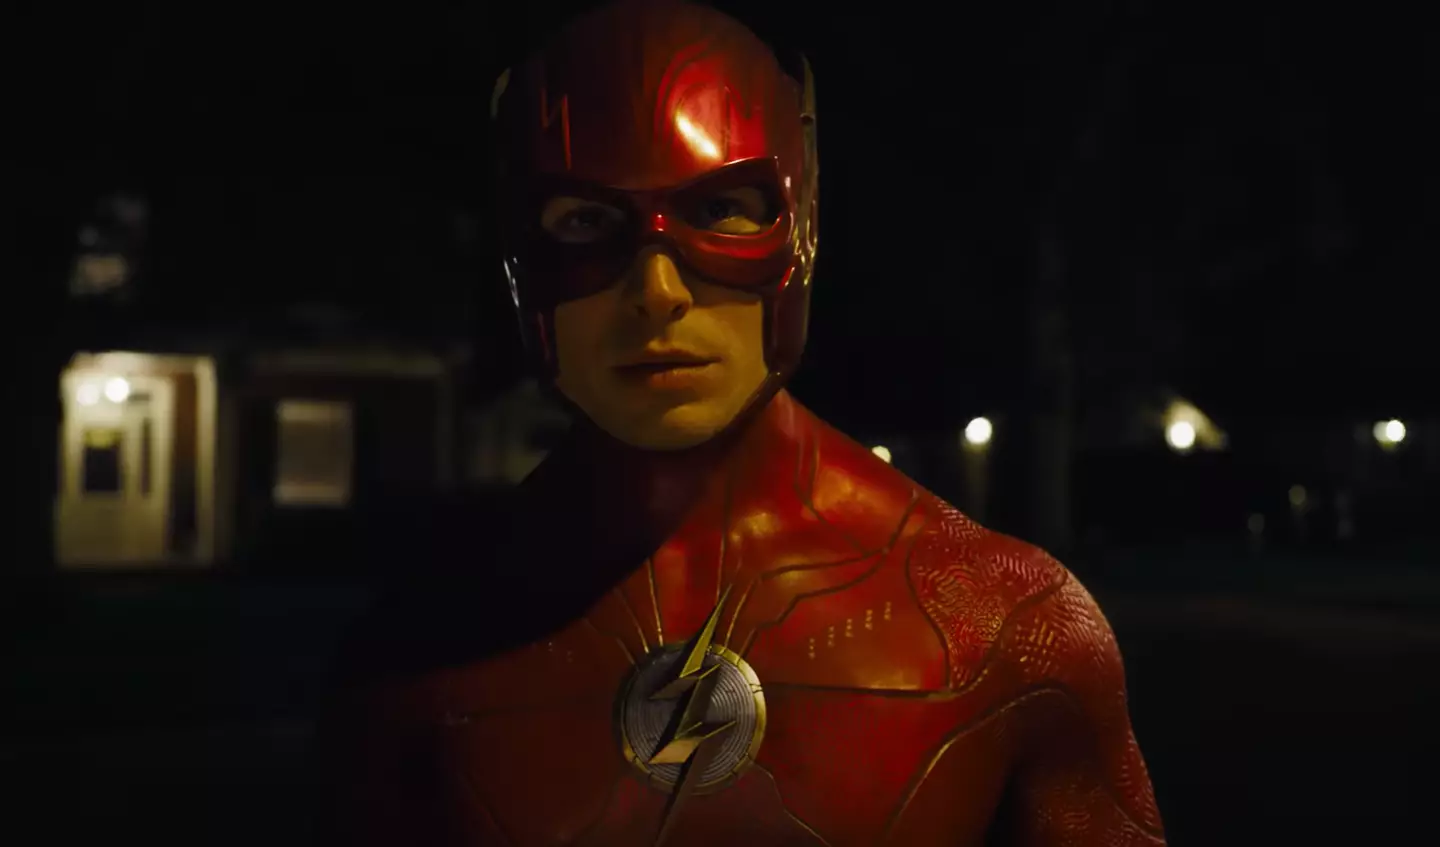 The ending of The Flash has been shrouded in secrecy.